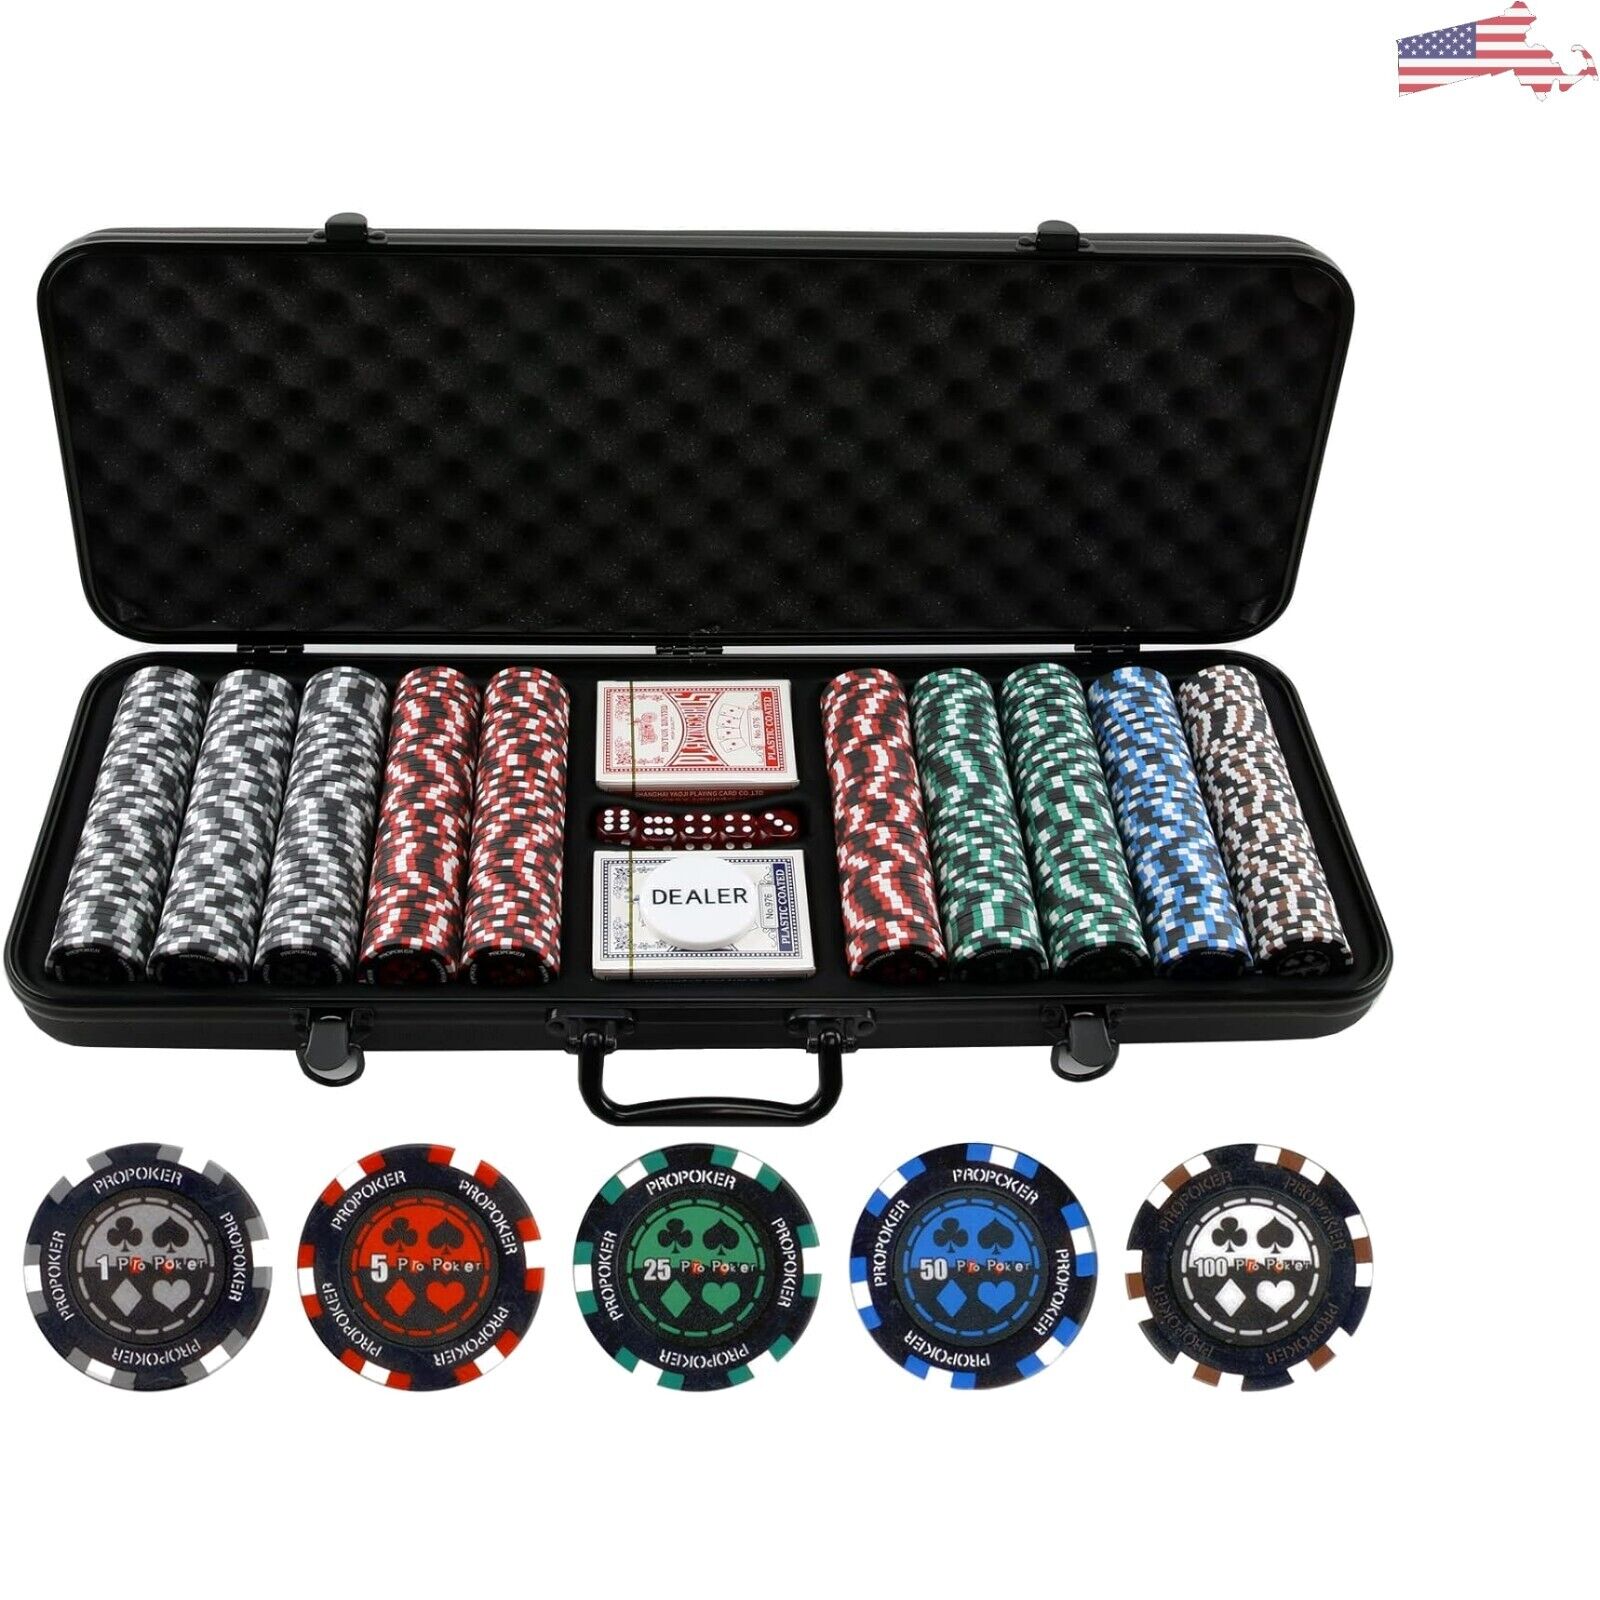 500 Piece Professional Poker Chip Set - Upgraded Casino Quality Clay Chips